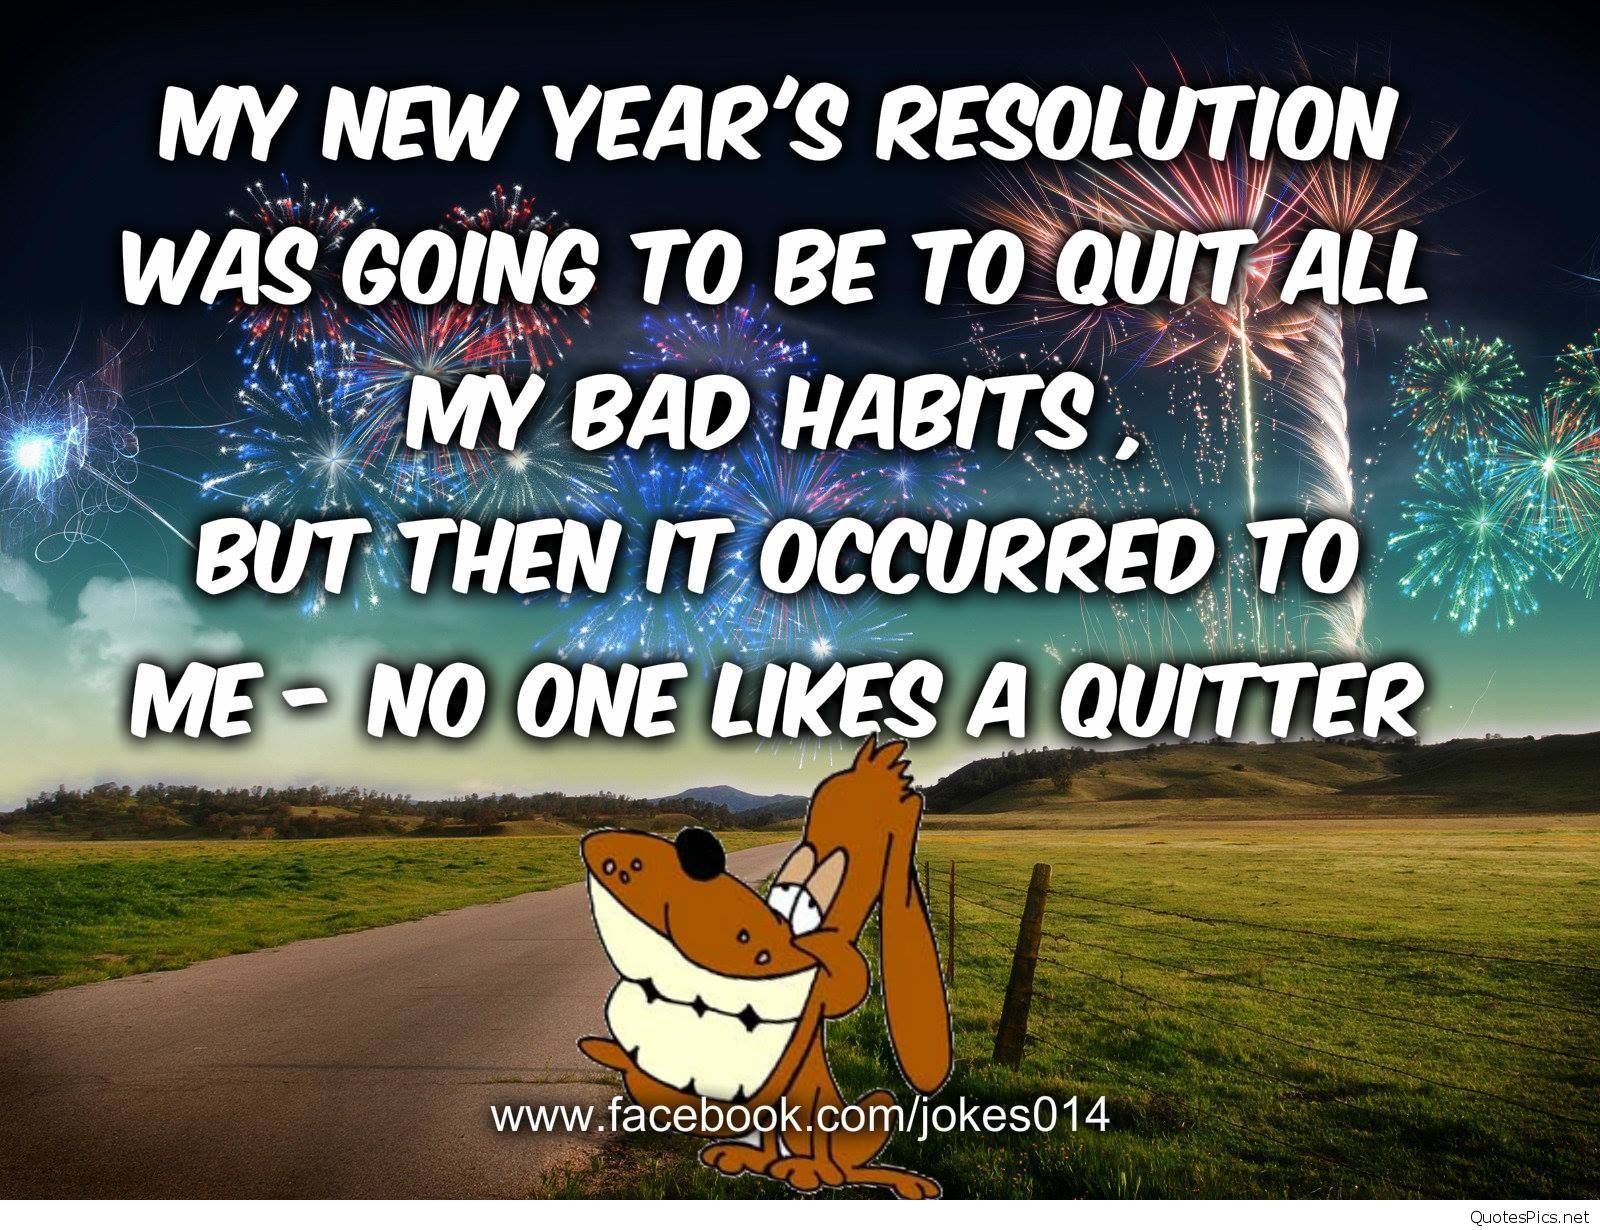 New Year Sarcastic Quotes
 Funny happy new year resolutions images & sayings cards 2017